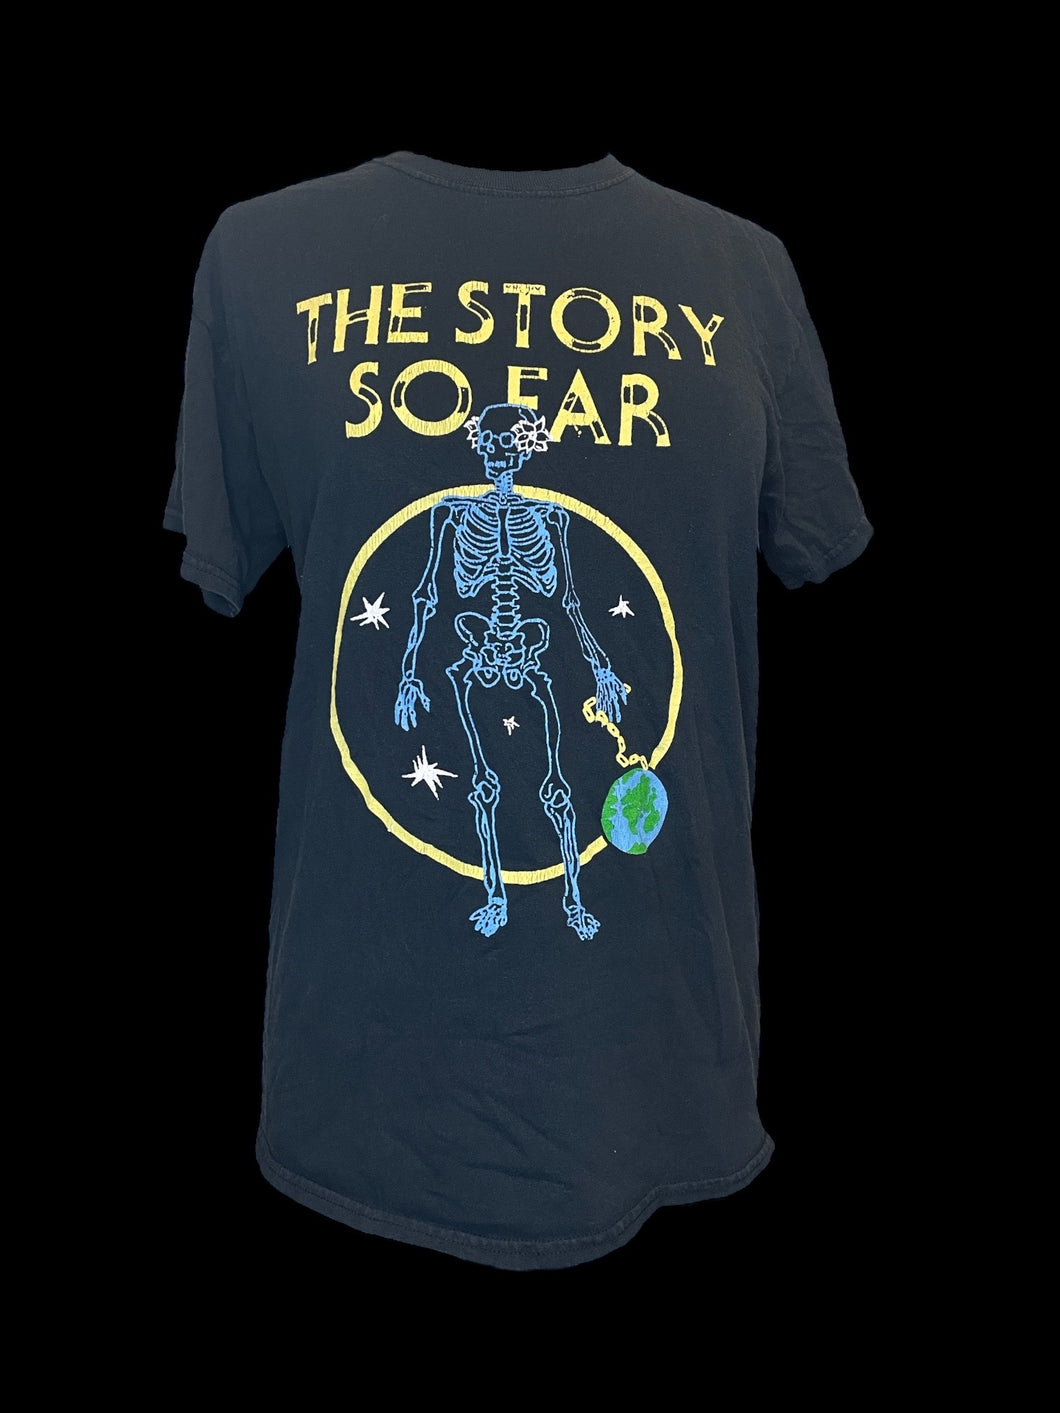 L Blue, yellow, & white “The Story So Far” graphic short sleeve crew neckline top